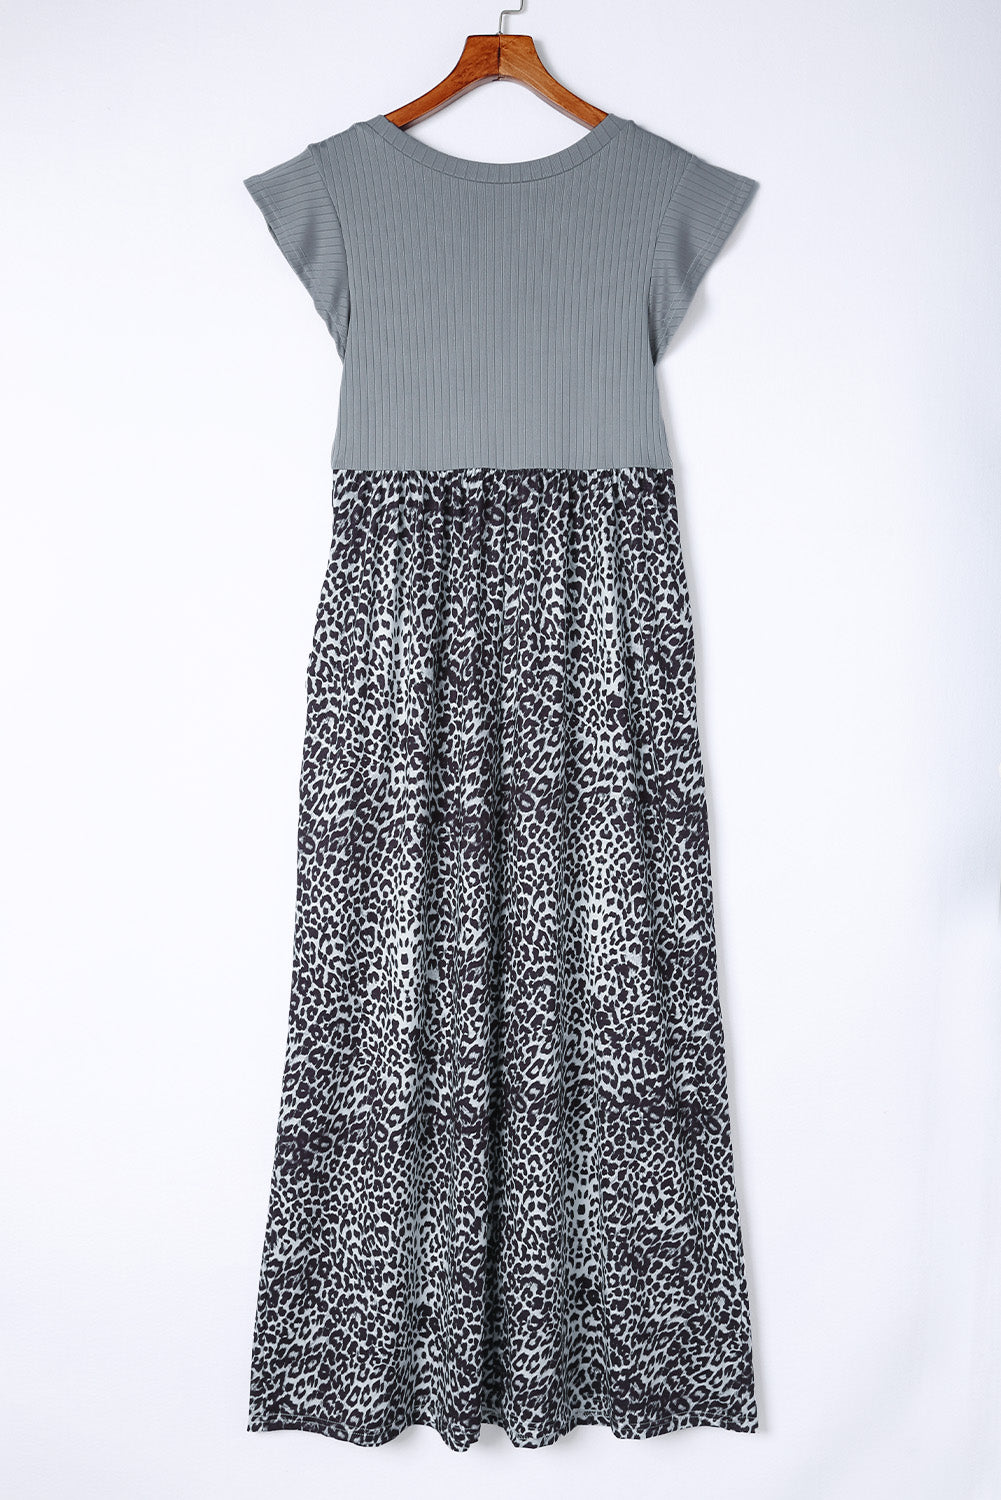 Gray Leopard Patchwork Ribbed Maxi Dress with Pockets